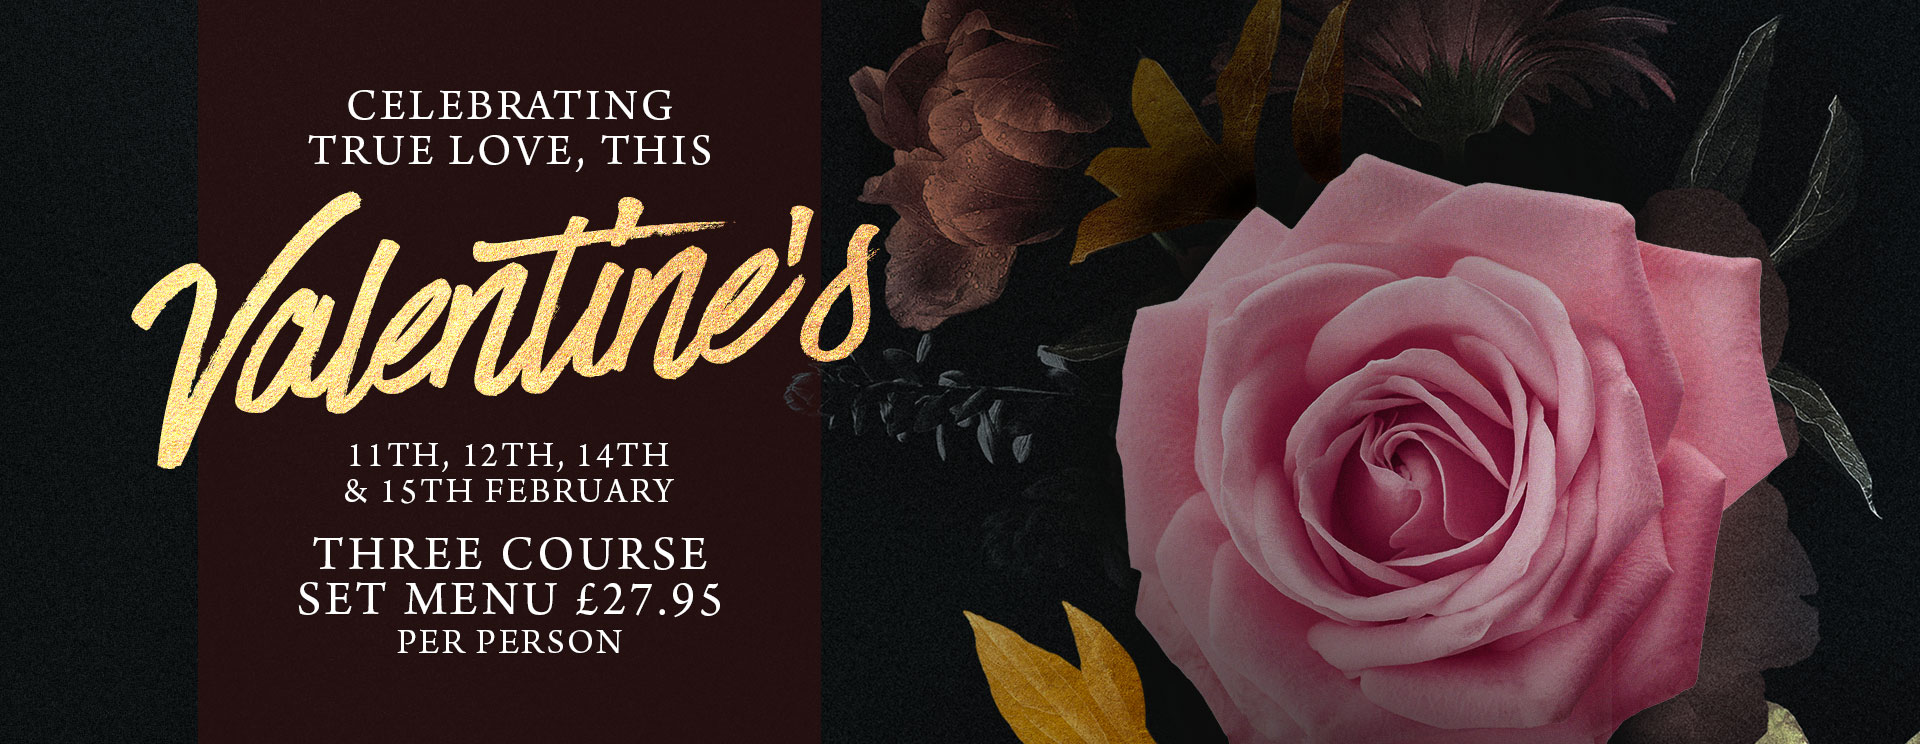 Valentines at The Willett Arms